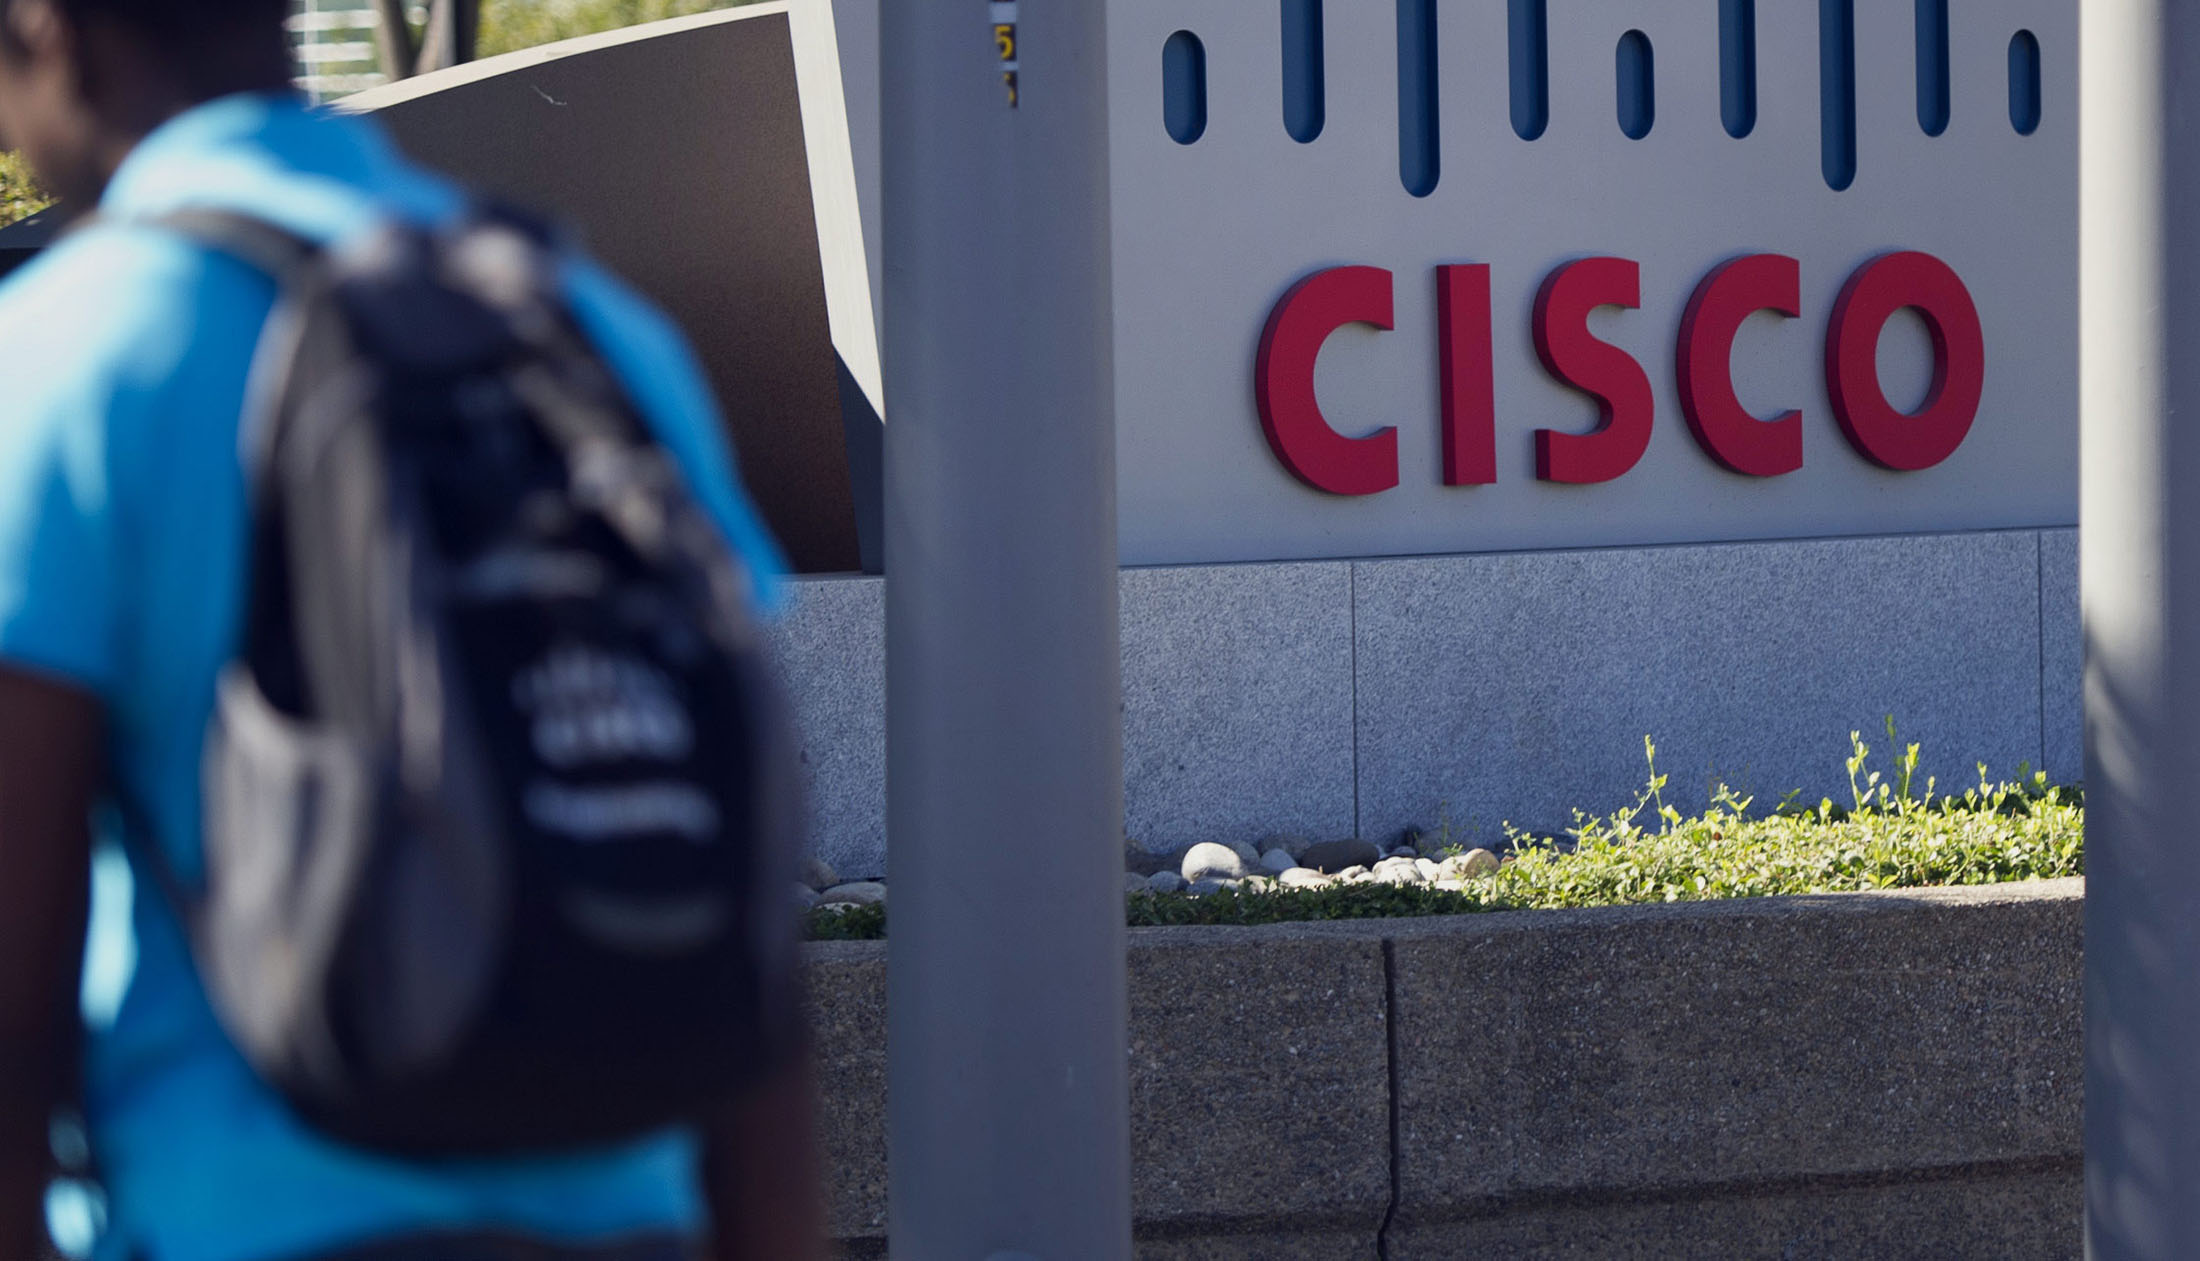 A pedestrian walks past Cisco Systems Inc. signage at the company’s headquarters in San Jose, California.